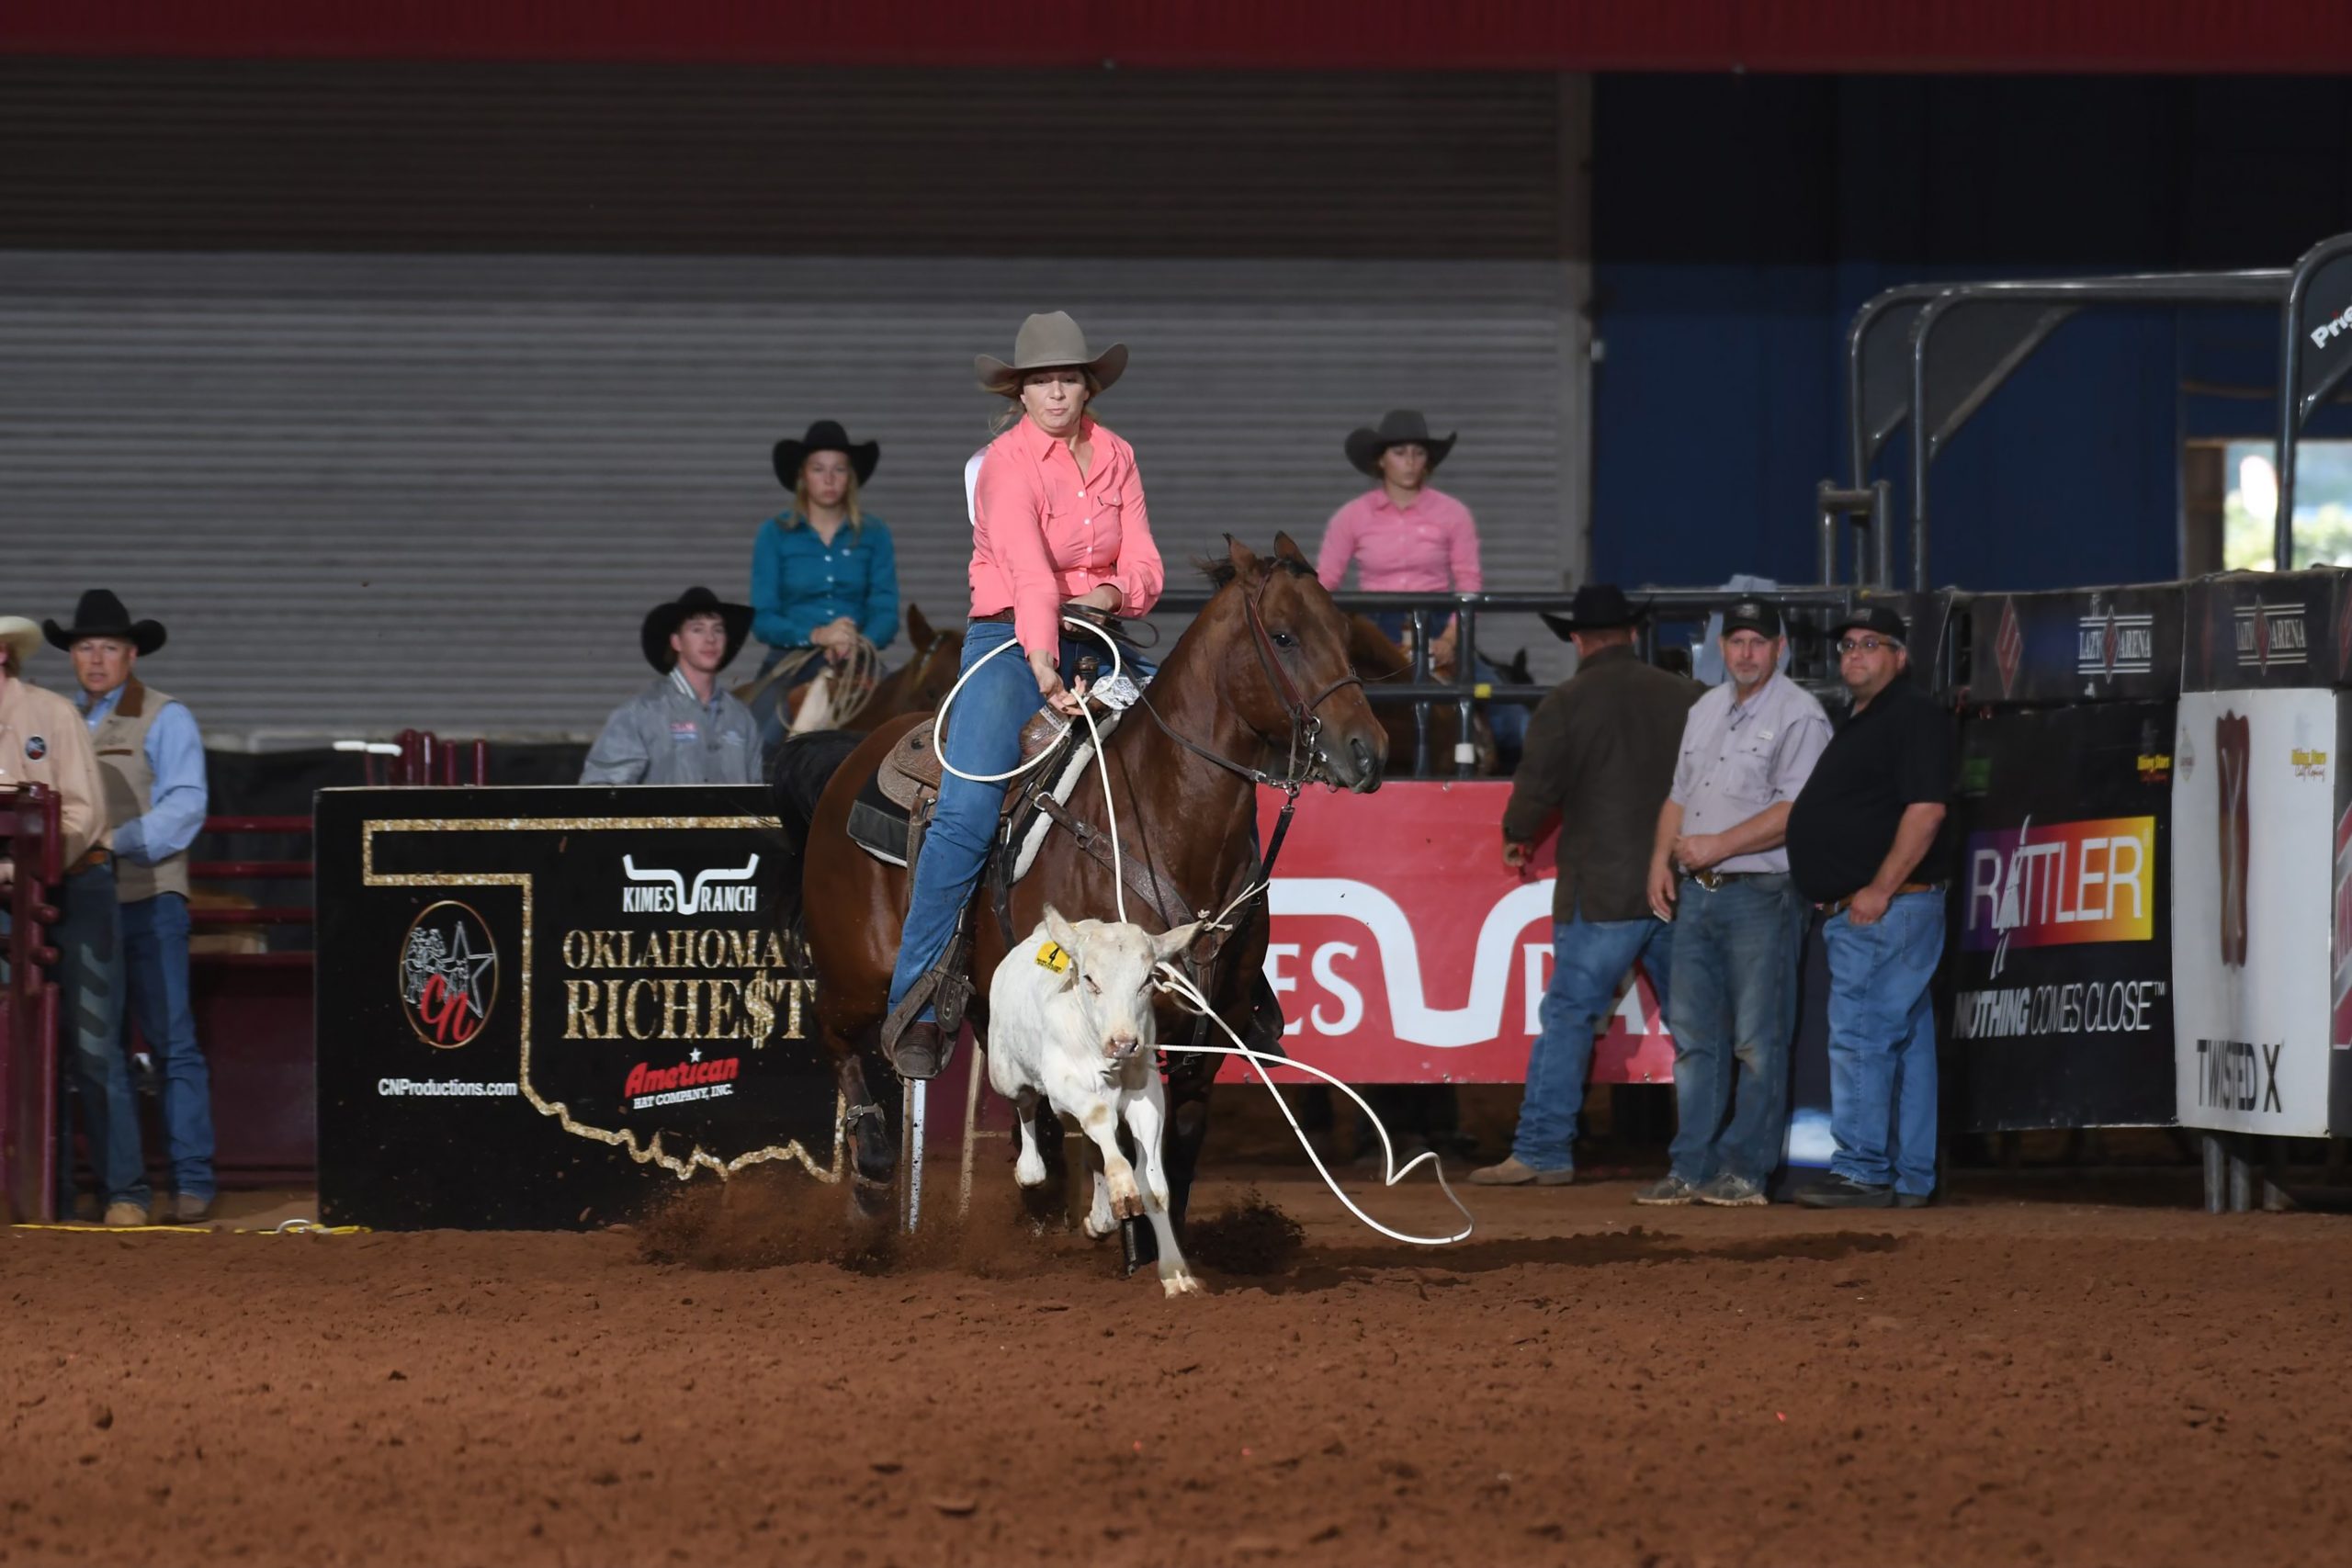 Andrea Lien lassos a calf during a breakaway roping competition.